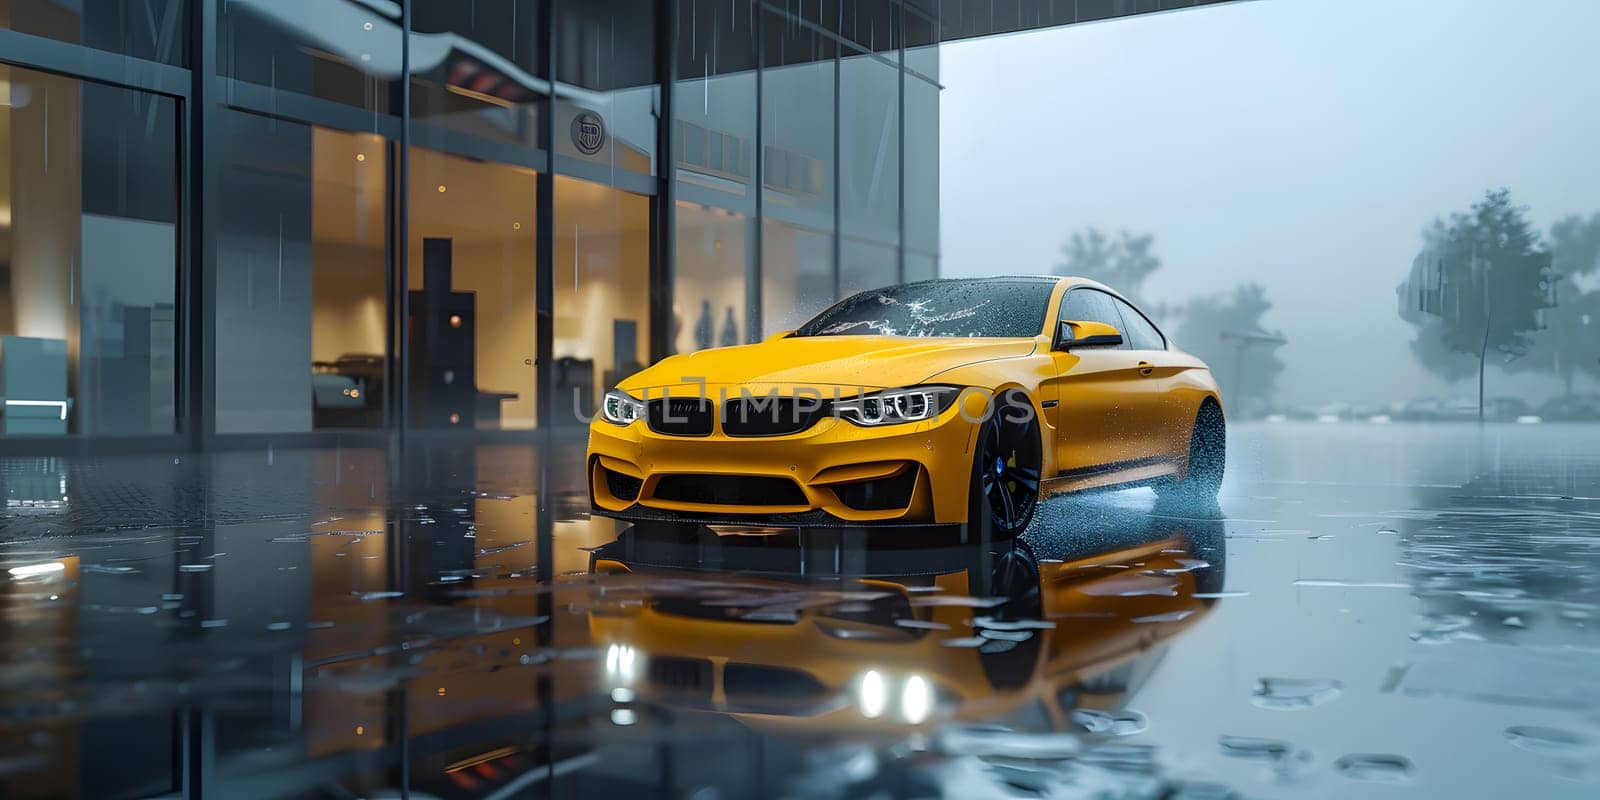 A bright yellow BMW M4 sits in the rain, parked in front of a building. Its sleek wheels and tires glisten with water, showcasing the cars impressive grille and headlamps